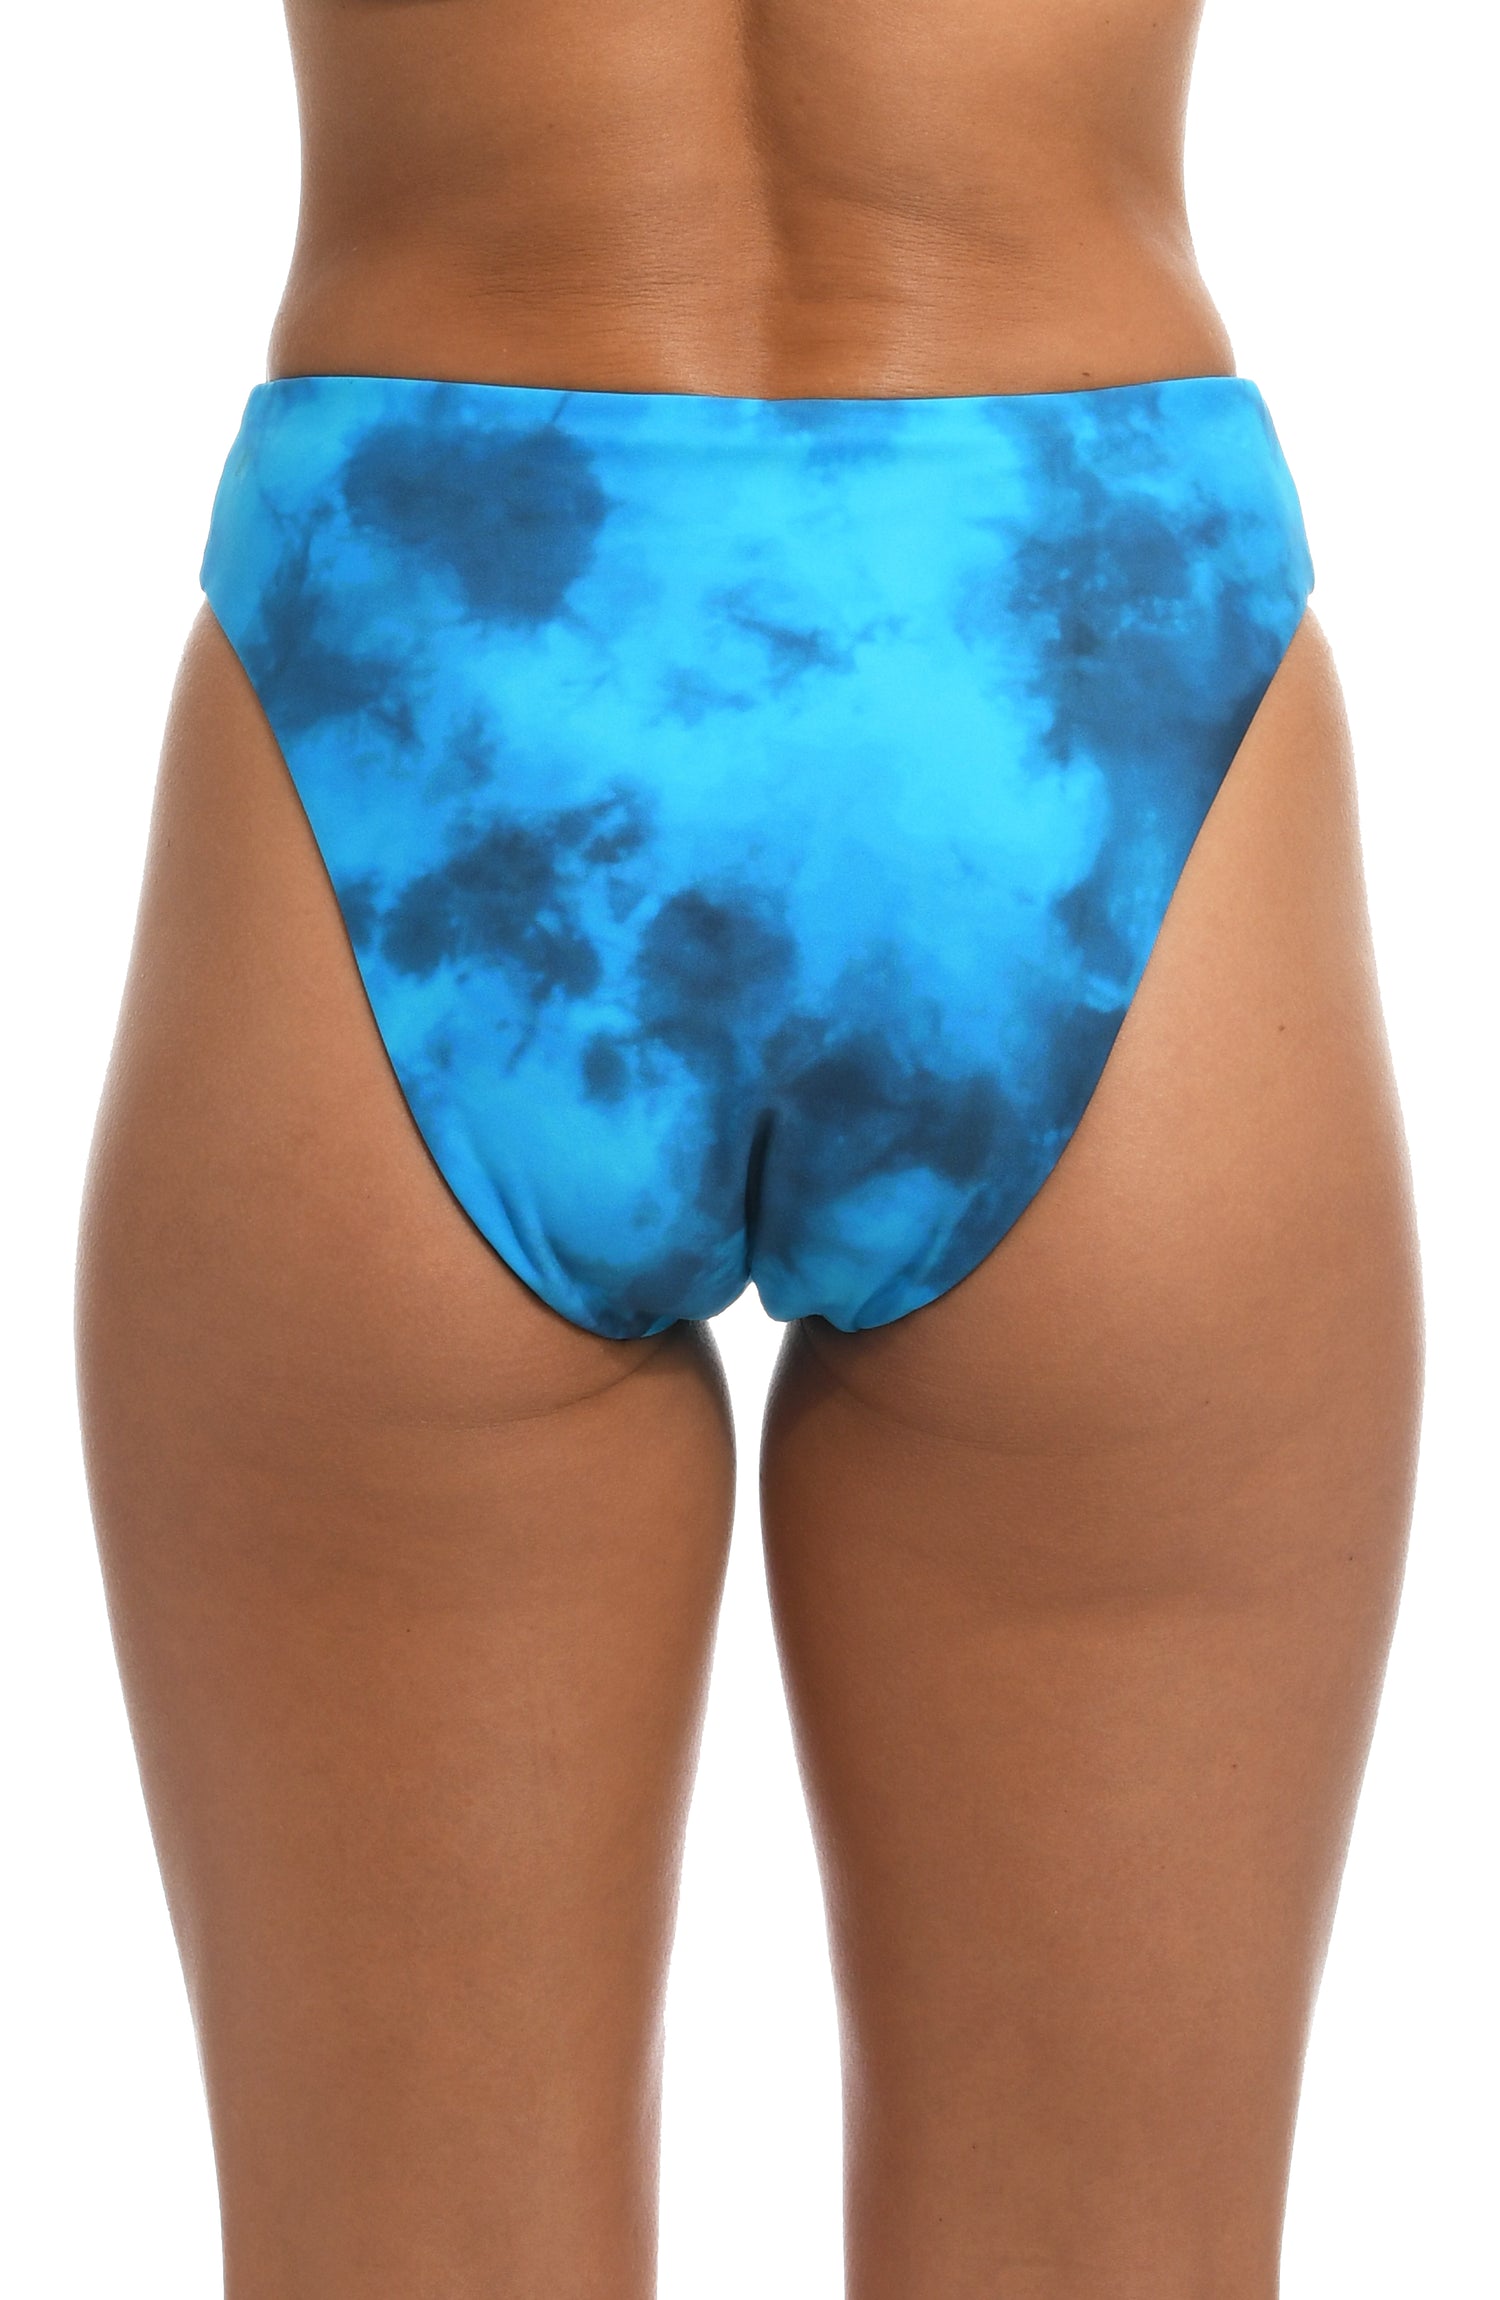 Model is wearing a blue dreamy cloud-inspired printed high waist swimsuit bottom from our Head in the Clouds collection.